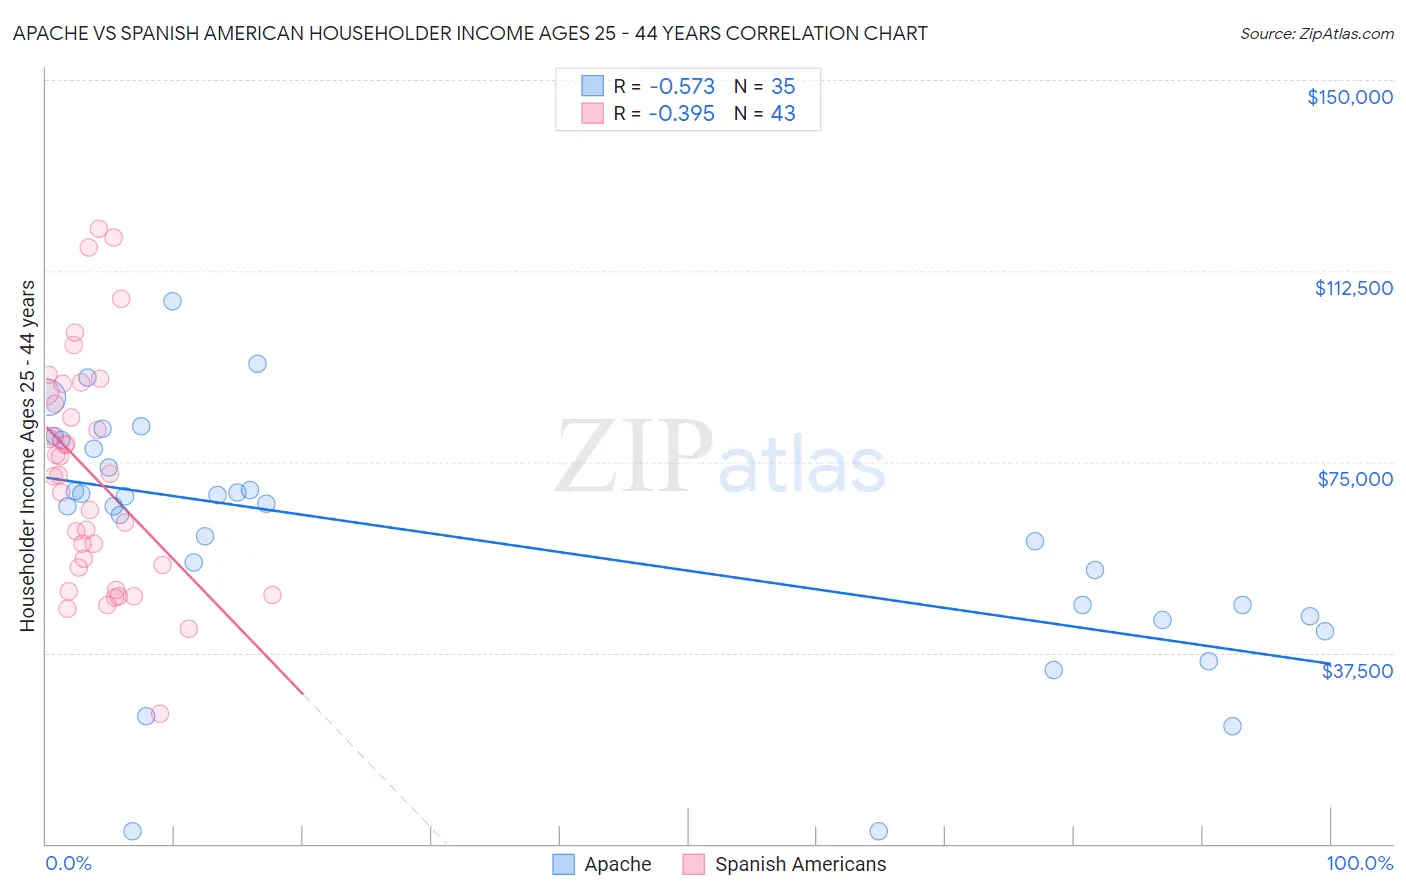 Apache vs Spanish American Householder Income Ages 25 - 44 years